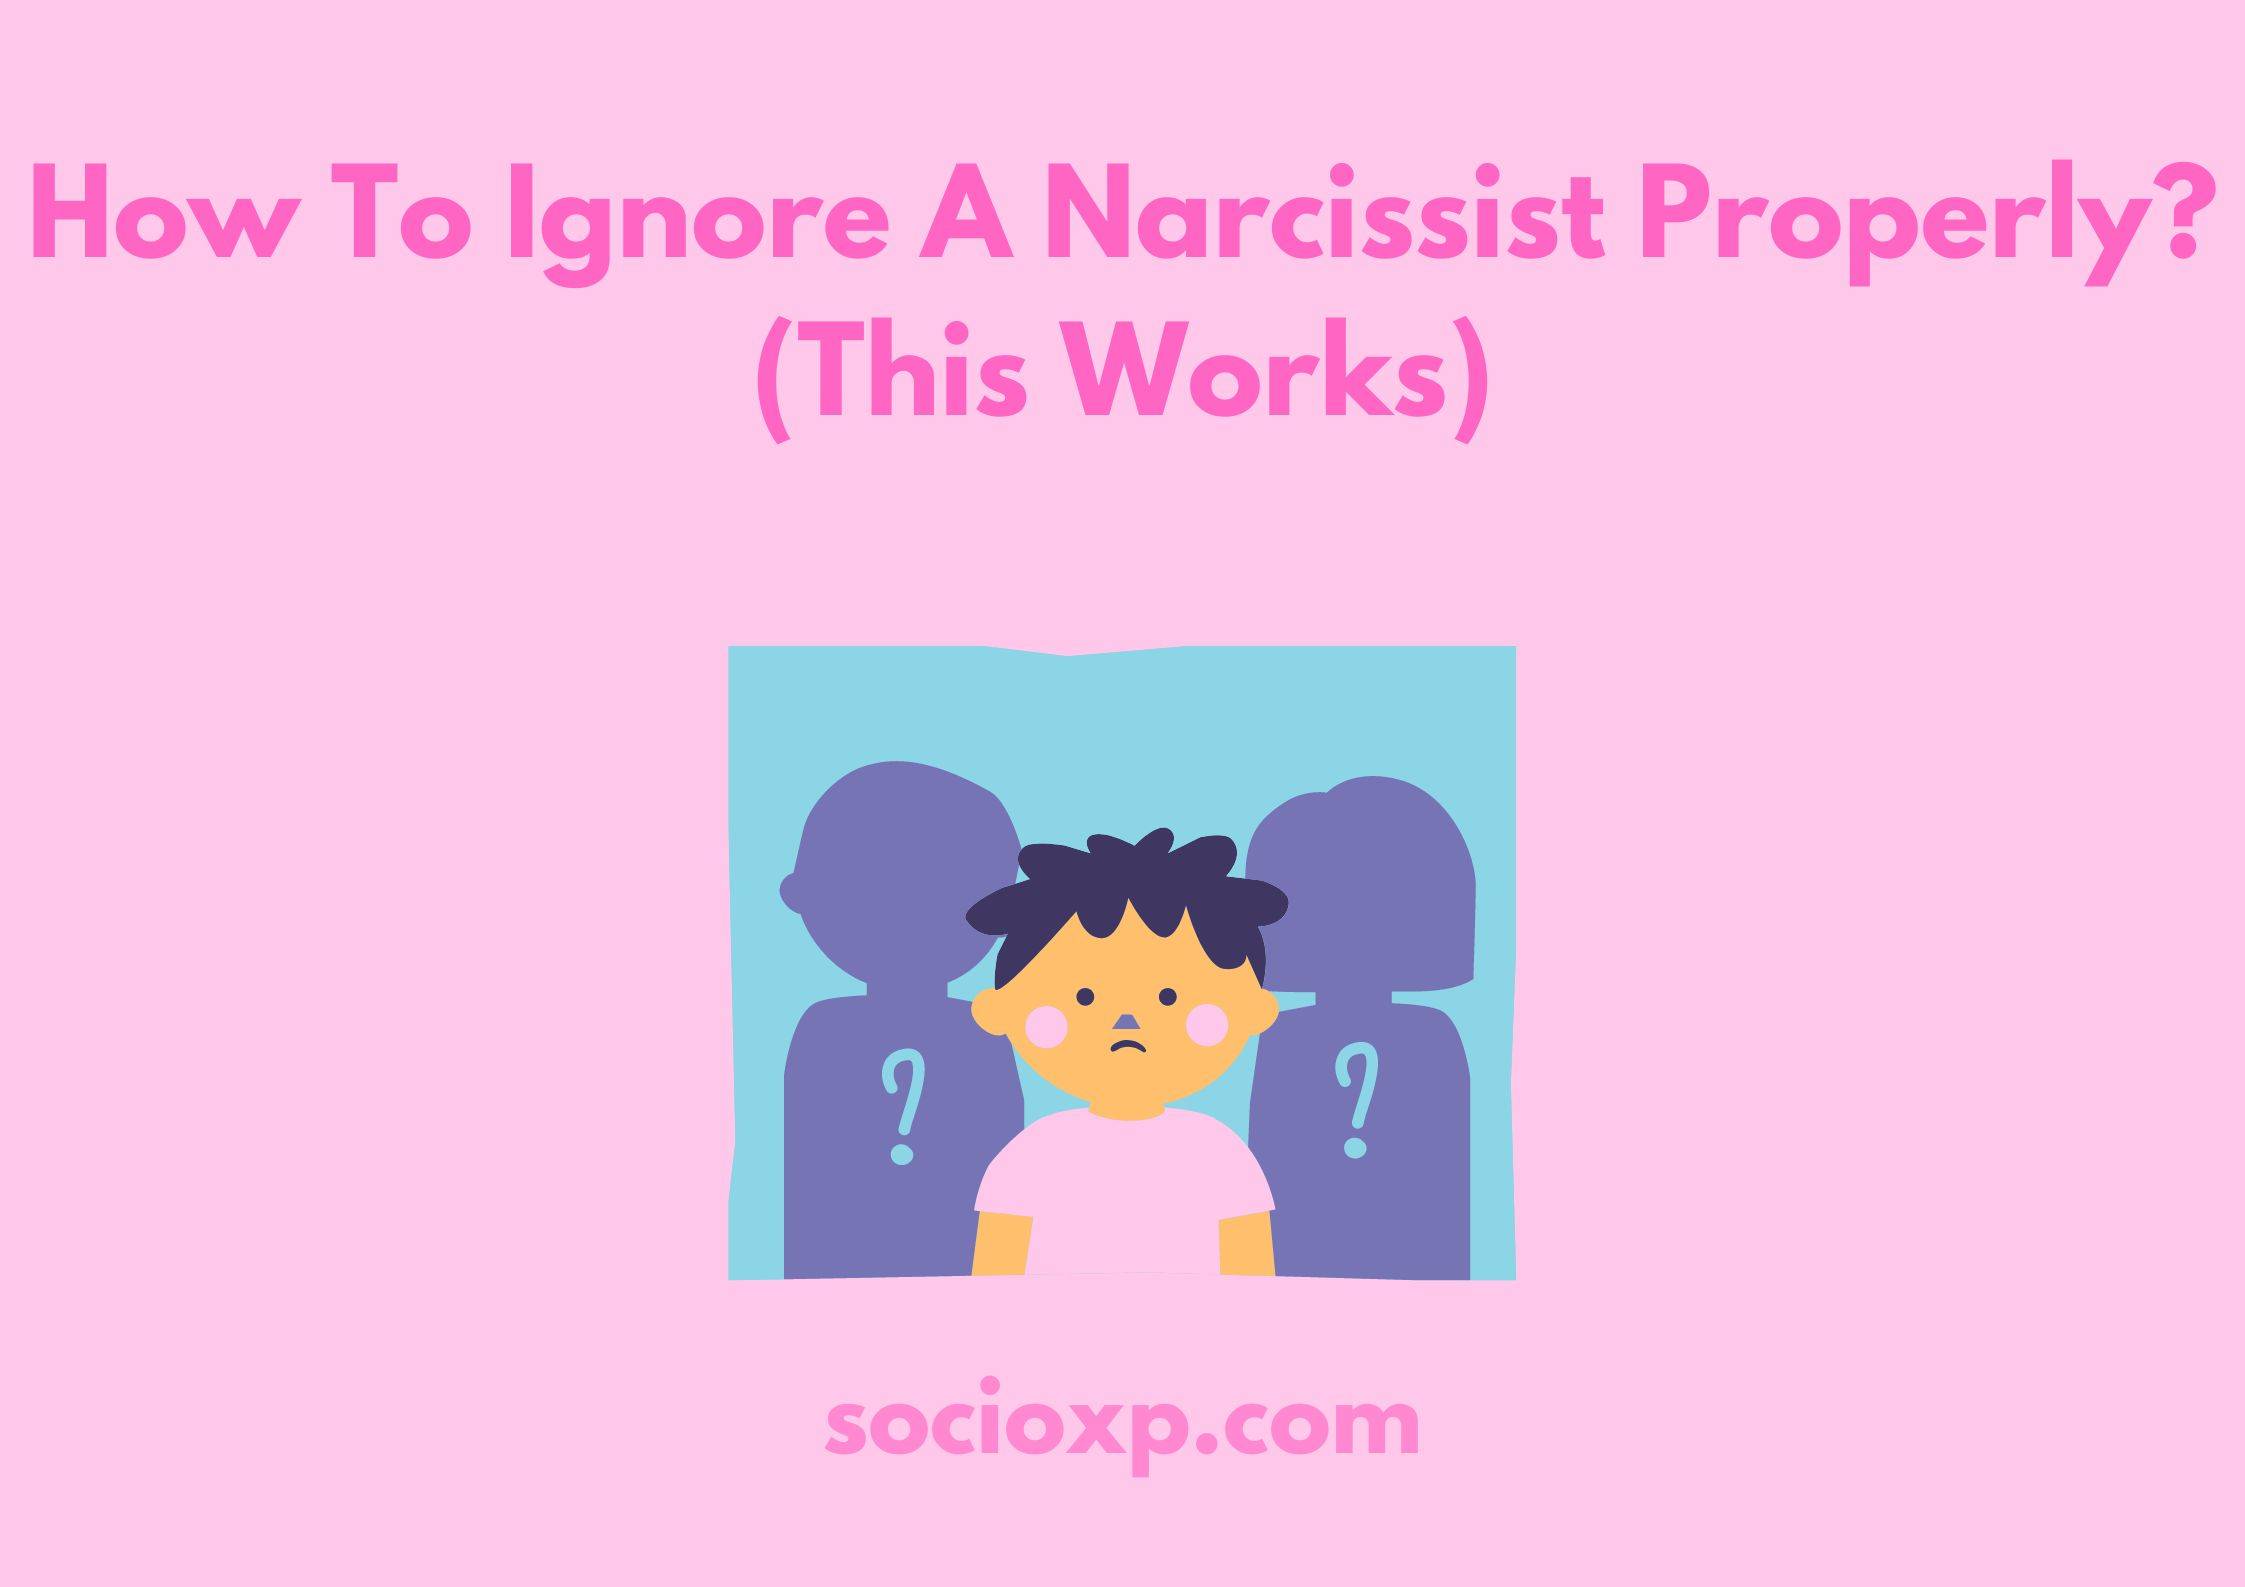 How To Ignore A Narcissist Properly? (This Works)